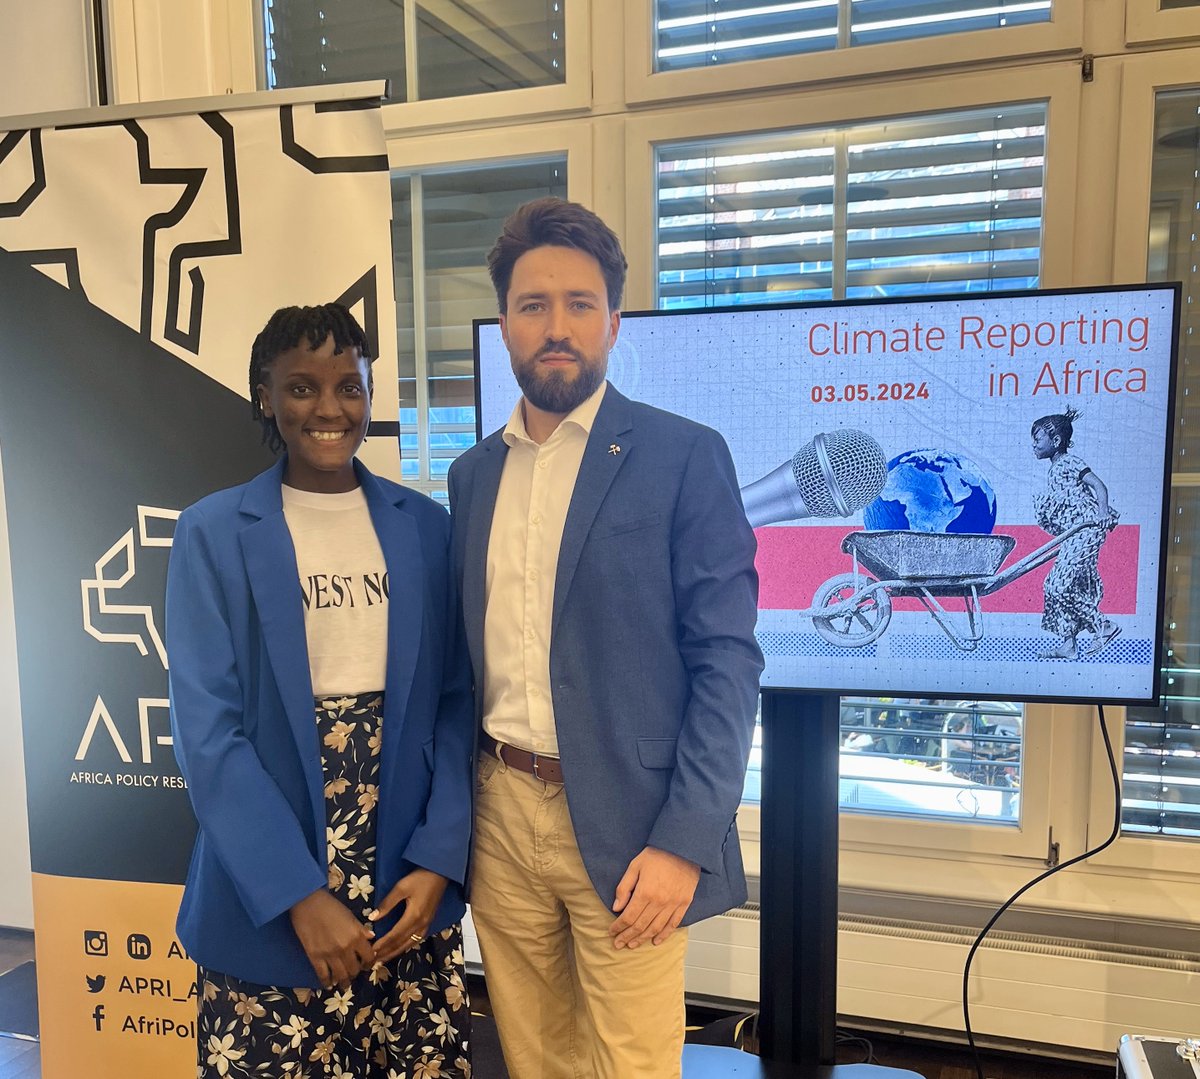 At the Climate Reporting in Africa Conference by @APRI, UNU-FLORES’ Dr. @AlekseenkoAV & @UNICEF Goodwill Amb. @vanessa_vash discussed Africa's climate challenges. A 2023 #UNICEF report shows that children in 48 out of 49 African countries at high/extreme risk of climate effects.